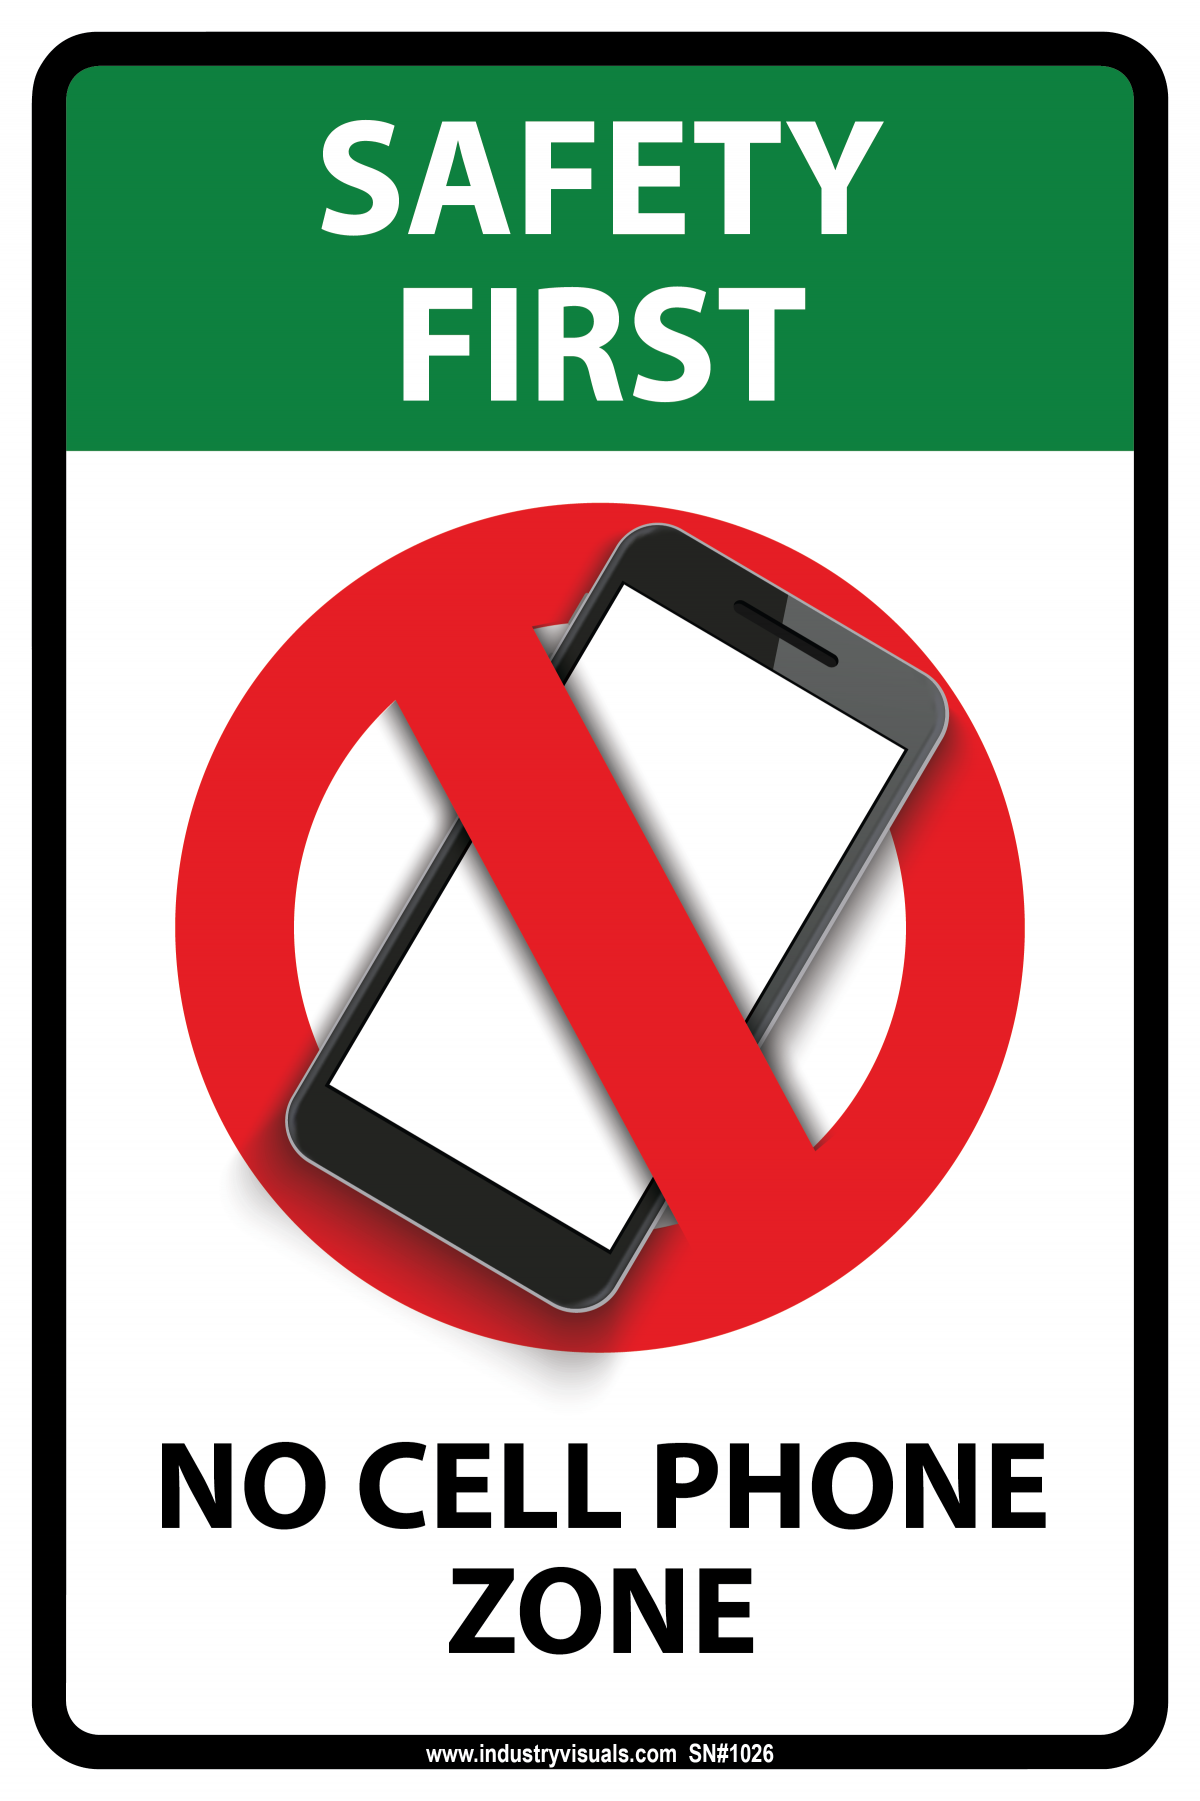 No Cell Phone Zone – Industry Visuals